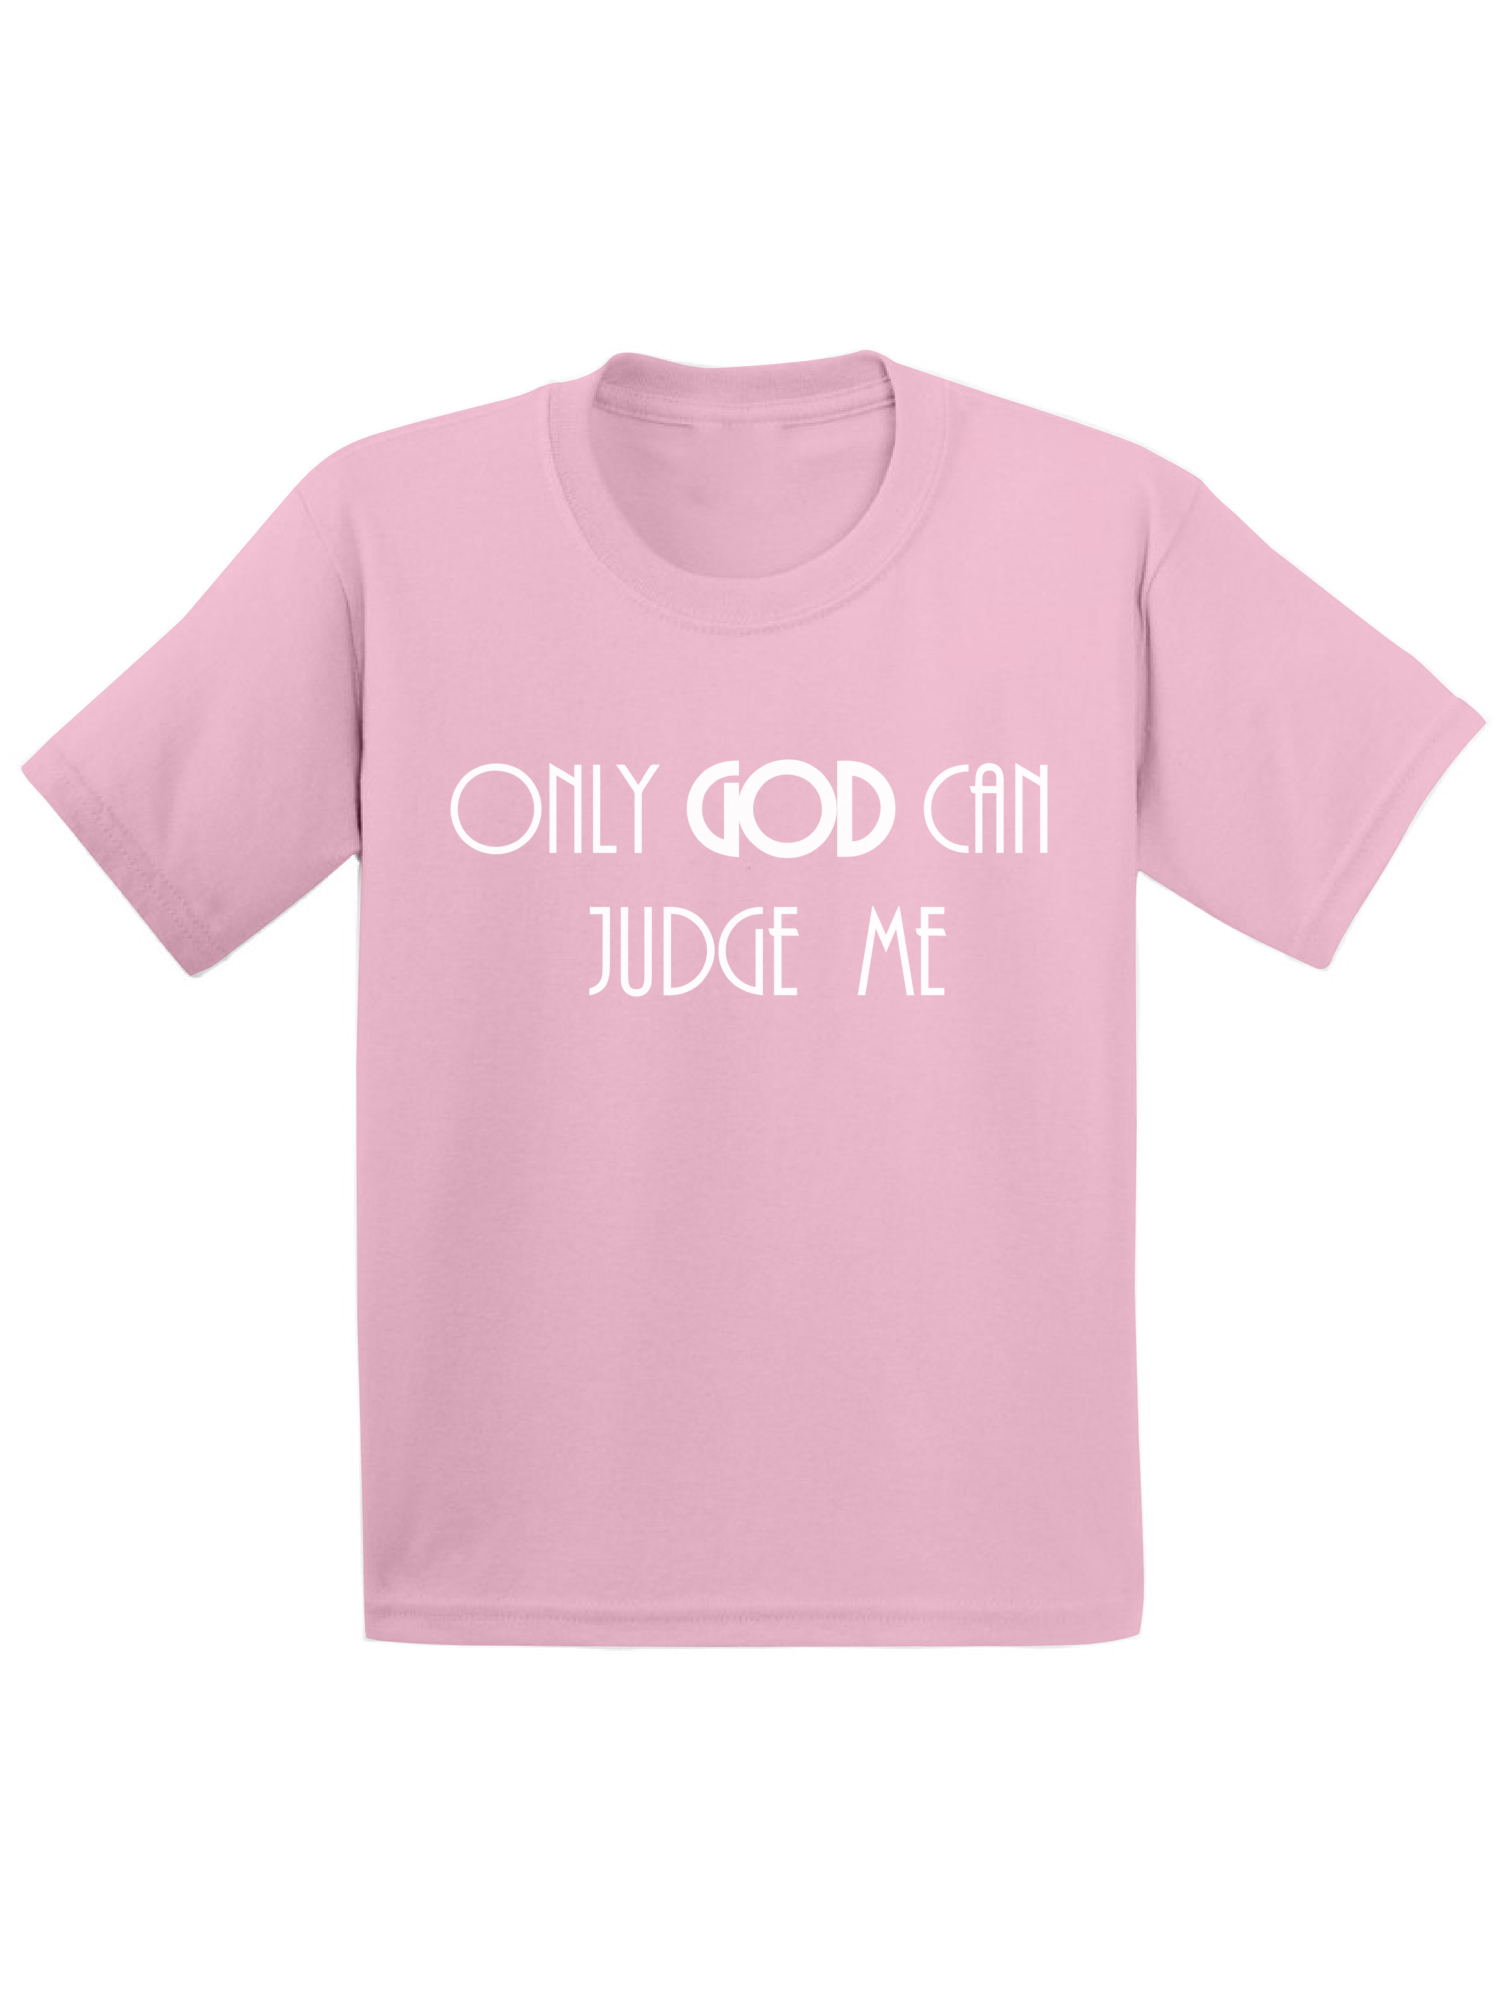 Awkward Styles Only God Can Judge Me Toddler Shirt Jesus Shirt for Kids T Shirt for Boys Christian Shirts for Girls Jesus T-Shirt for Children Christ Clothes Only God Can Judge Me T-Shirt for Toddlers - image 1 of 4